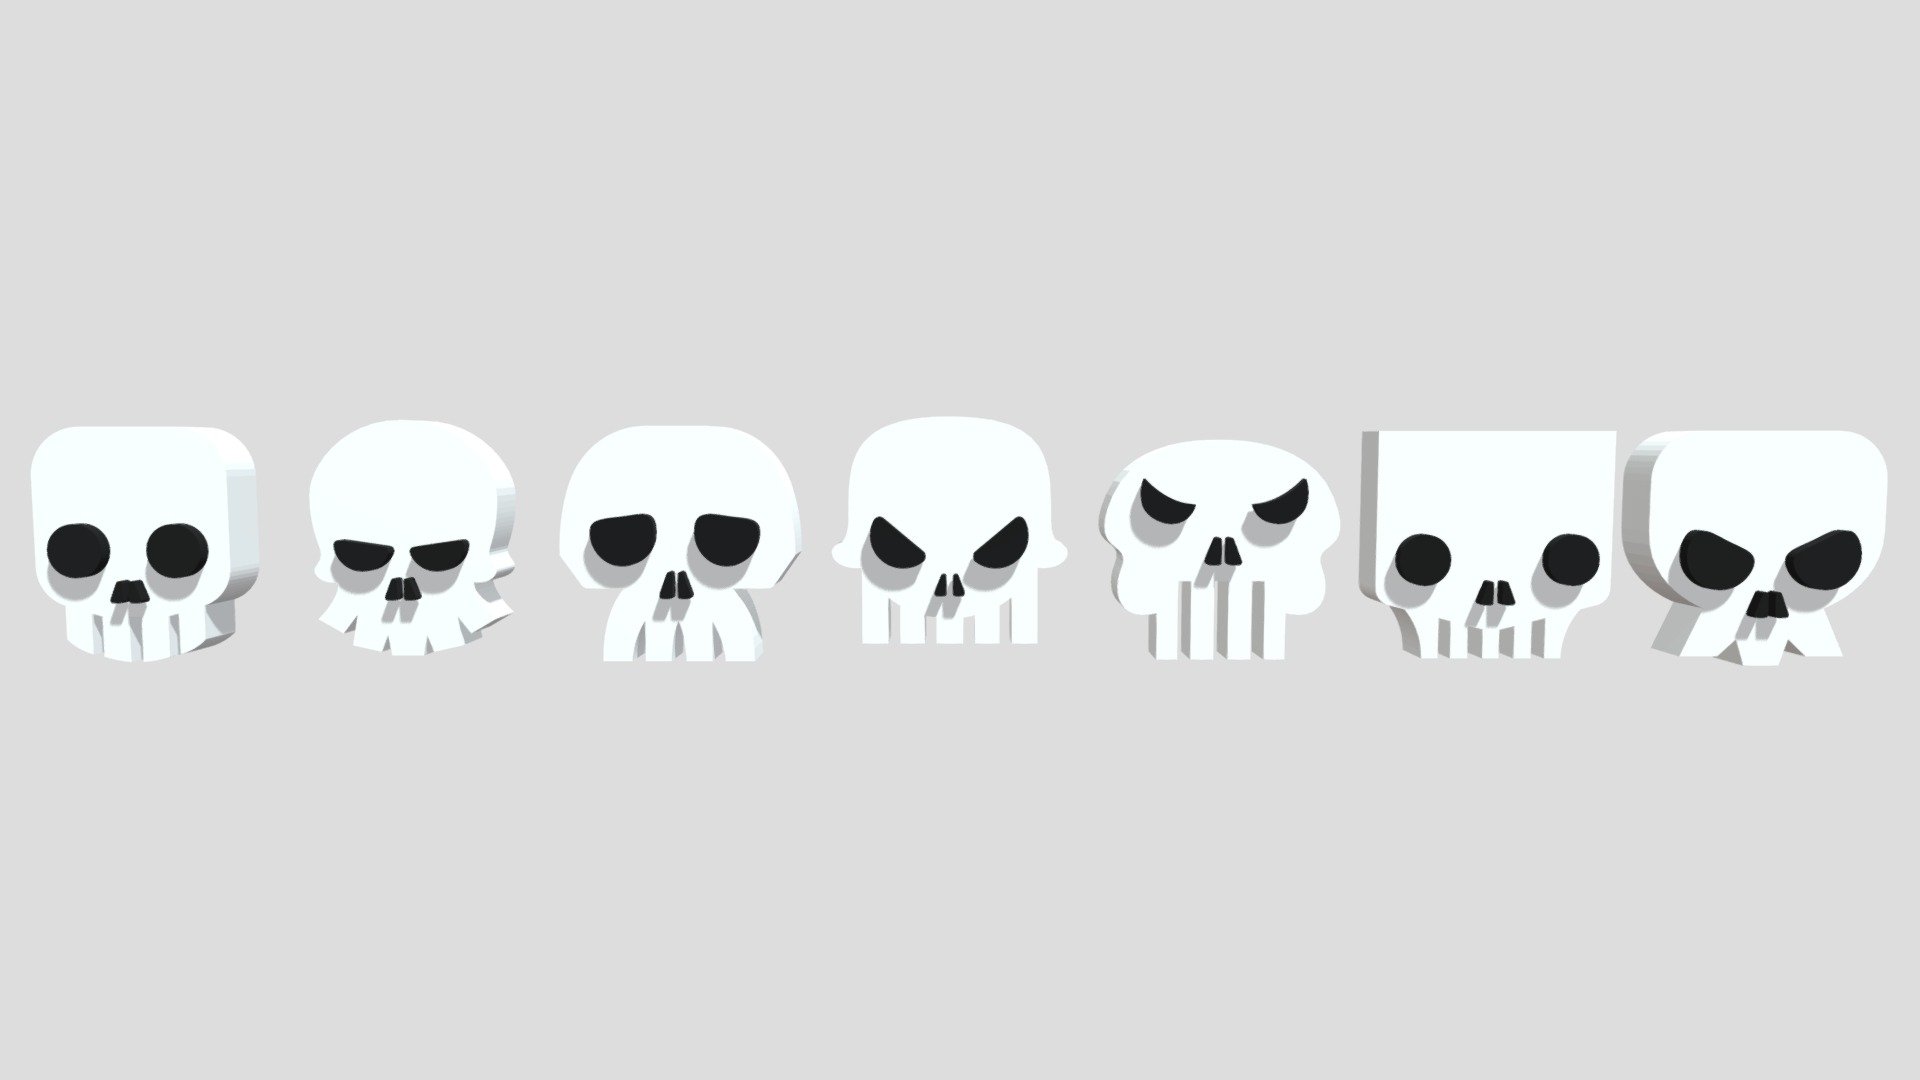 3D skull icon set for games. Consists of two materials - black and white.
Can be used in any project.

Attribution is not required, but appreciated 3d model